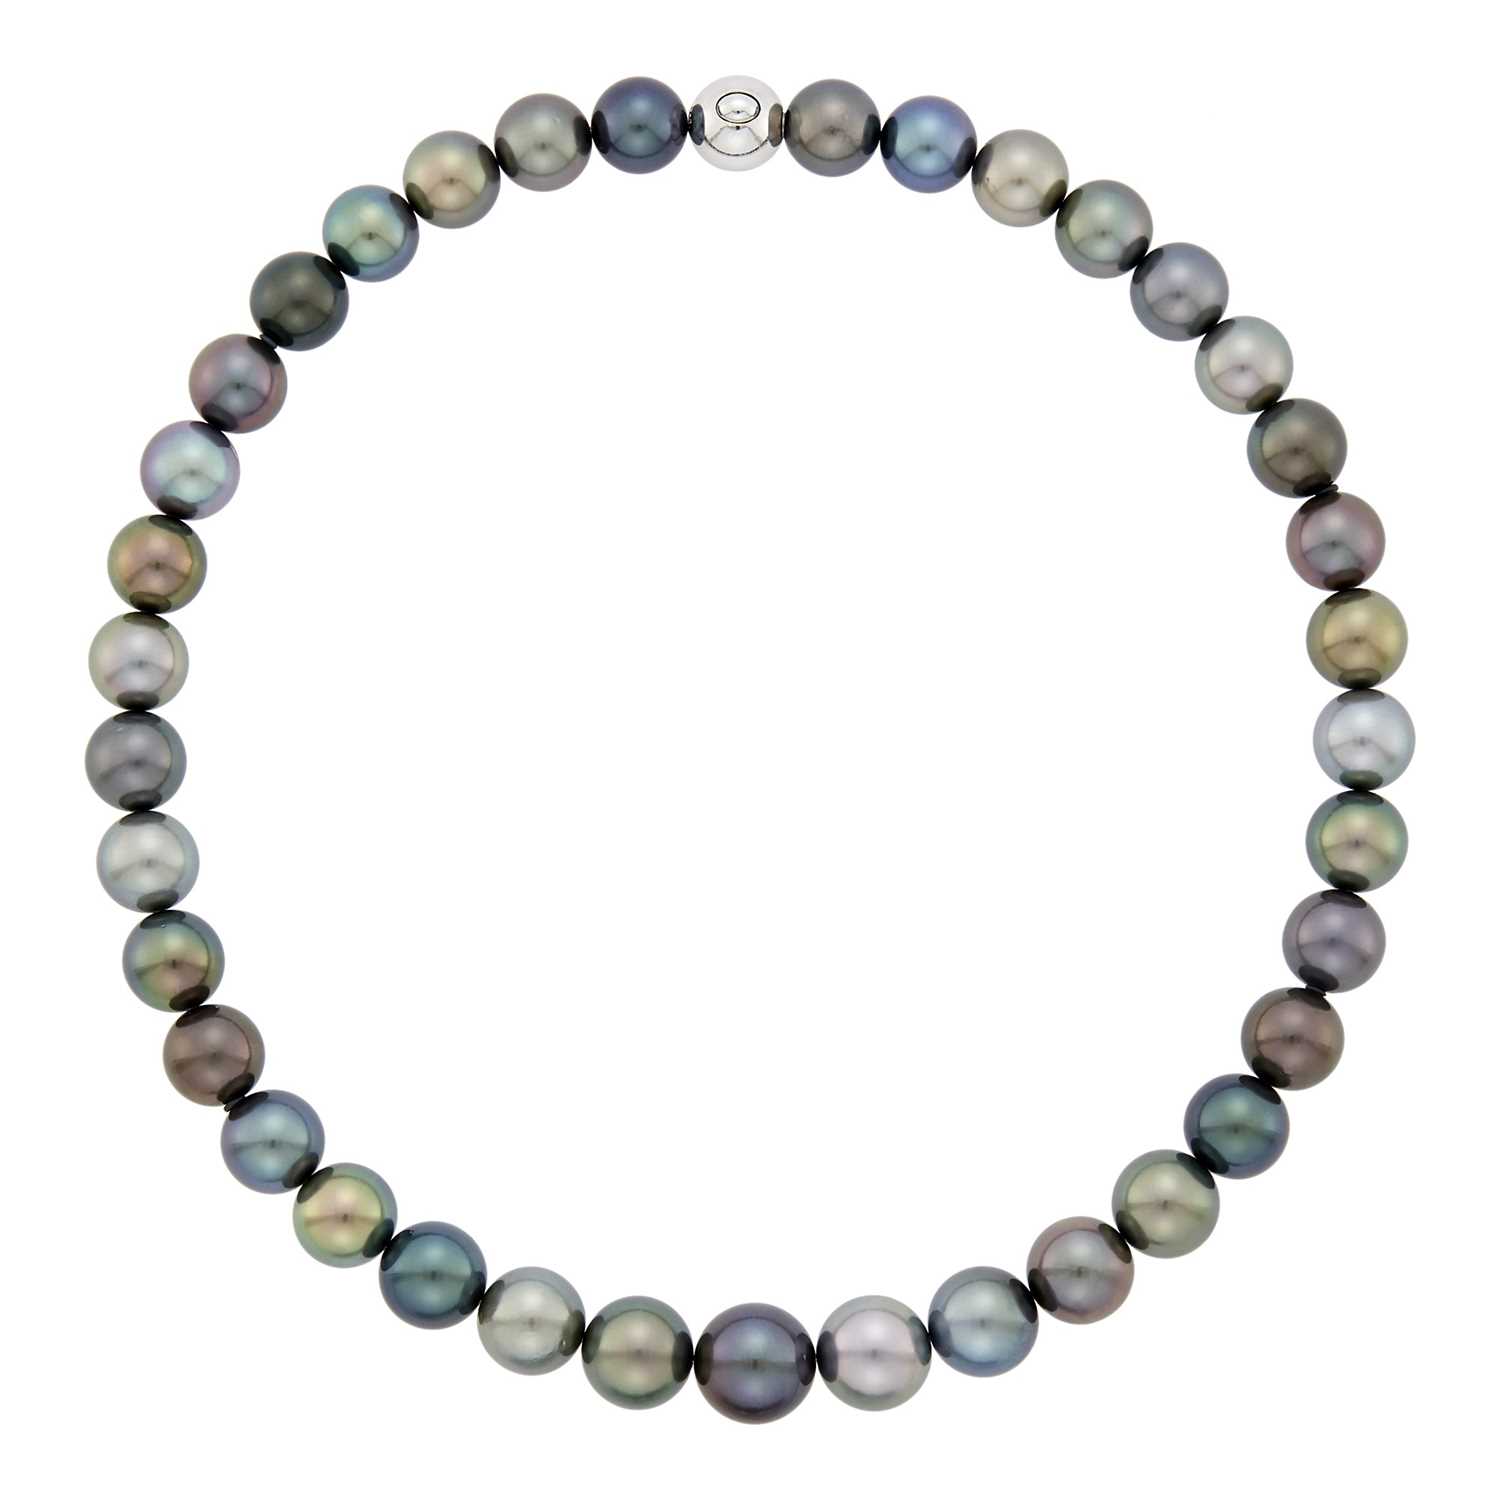 Lot 83 - Tahitian Gray and Black Cultured Pearl Necklace with White Gold Ball Clasp